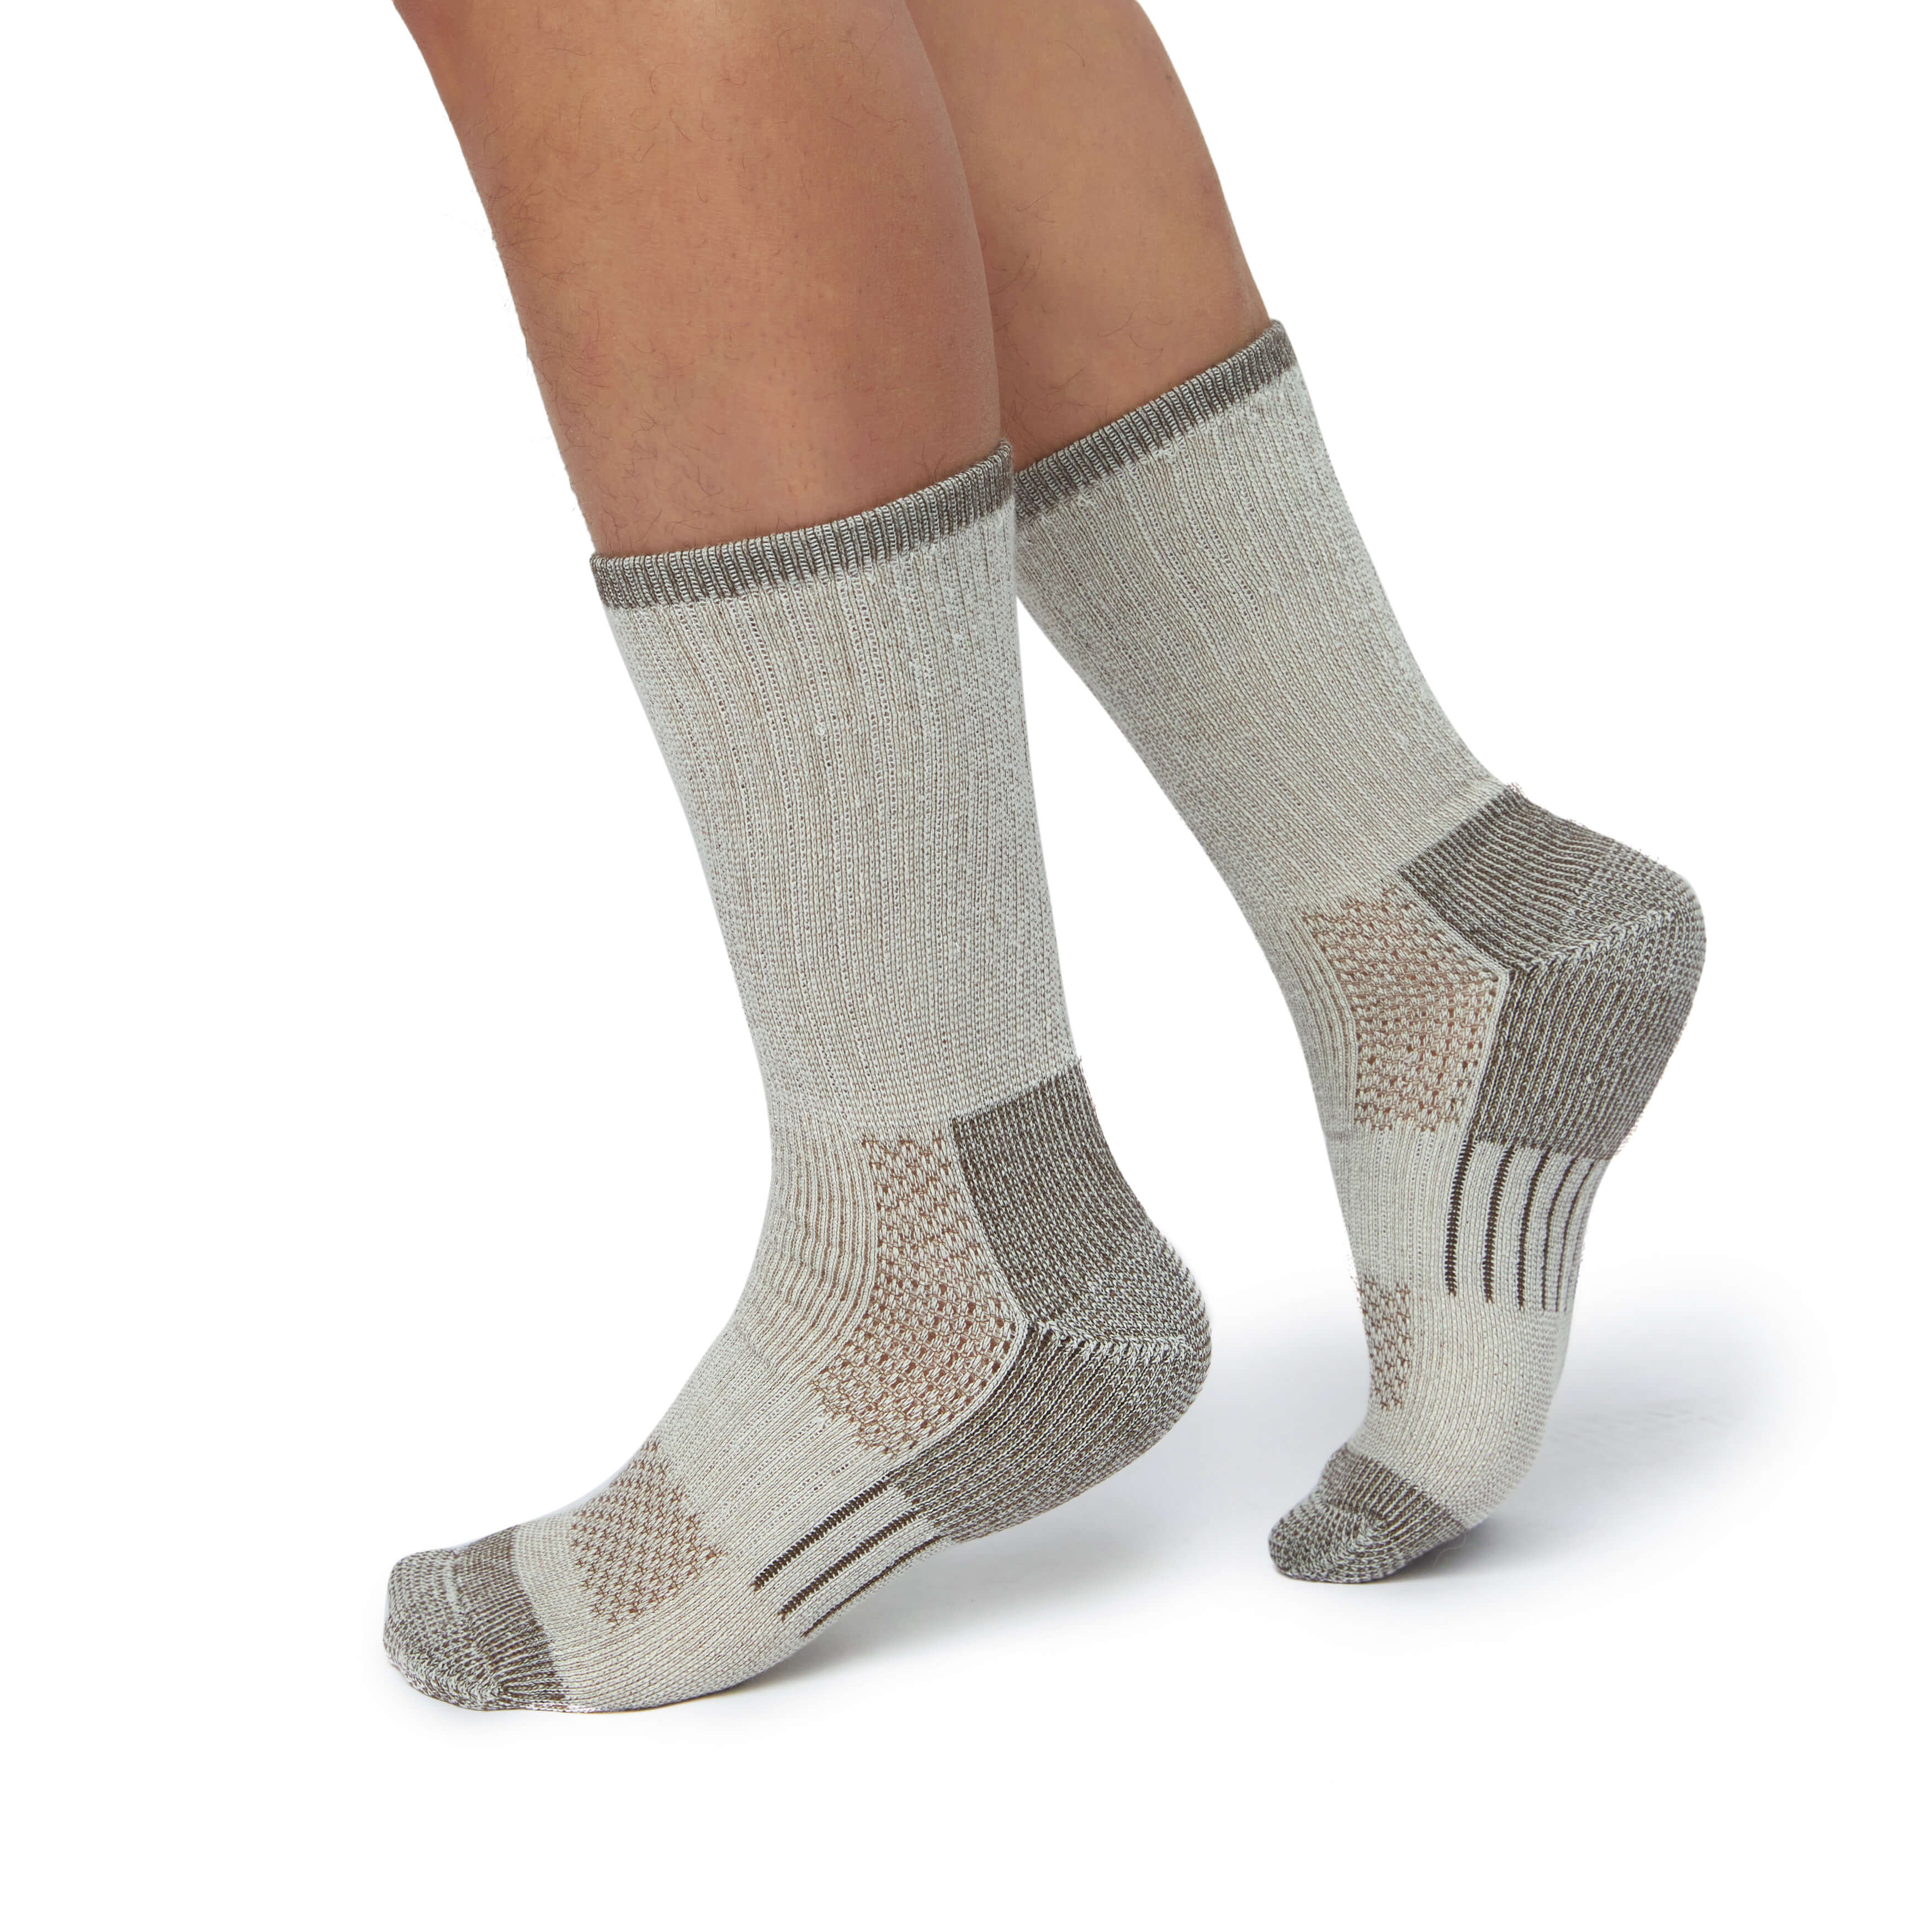 MerinoHouse Merino Wool Socks are designed for extreme weather conditions. They're perfect for outdoor activities and sports like skiing, hiking, mountaineering, camping, cycling, and long outdoor work.-4